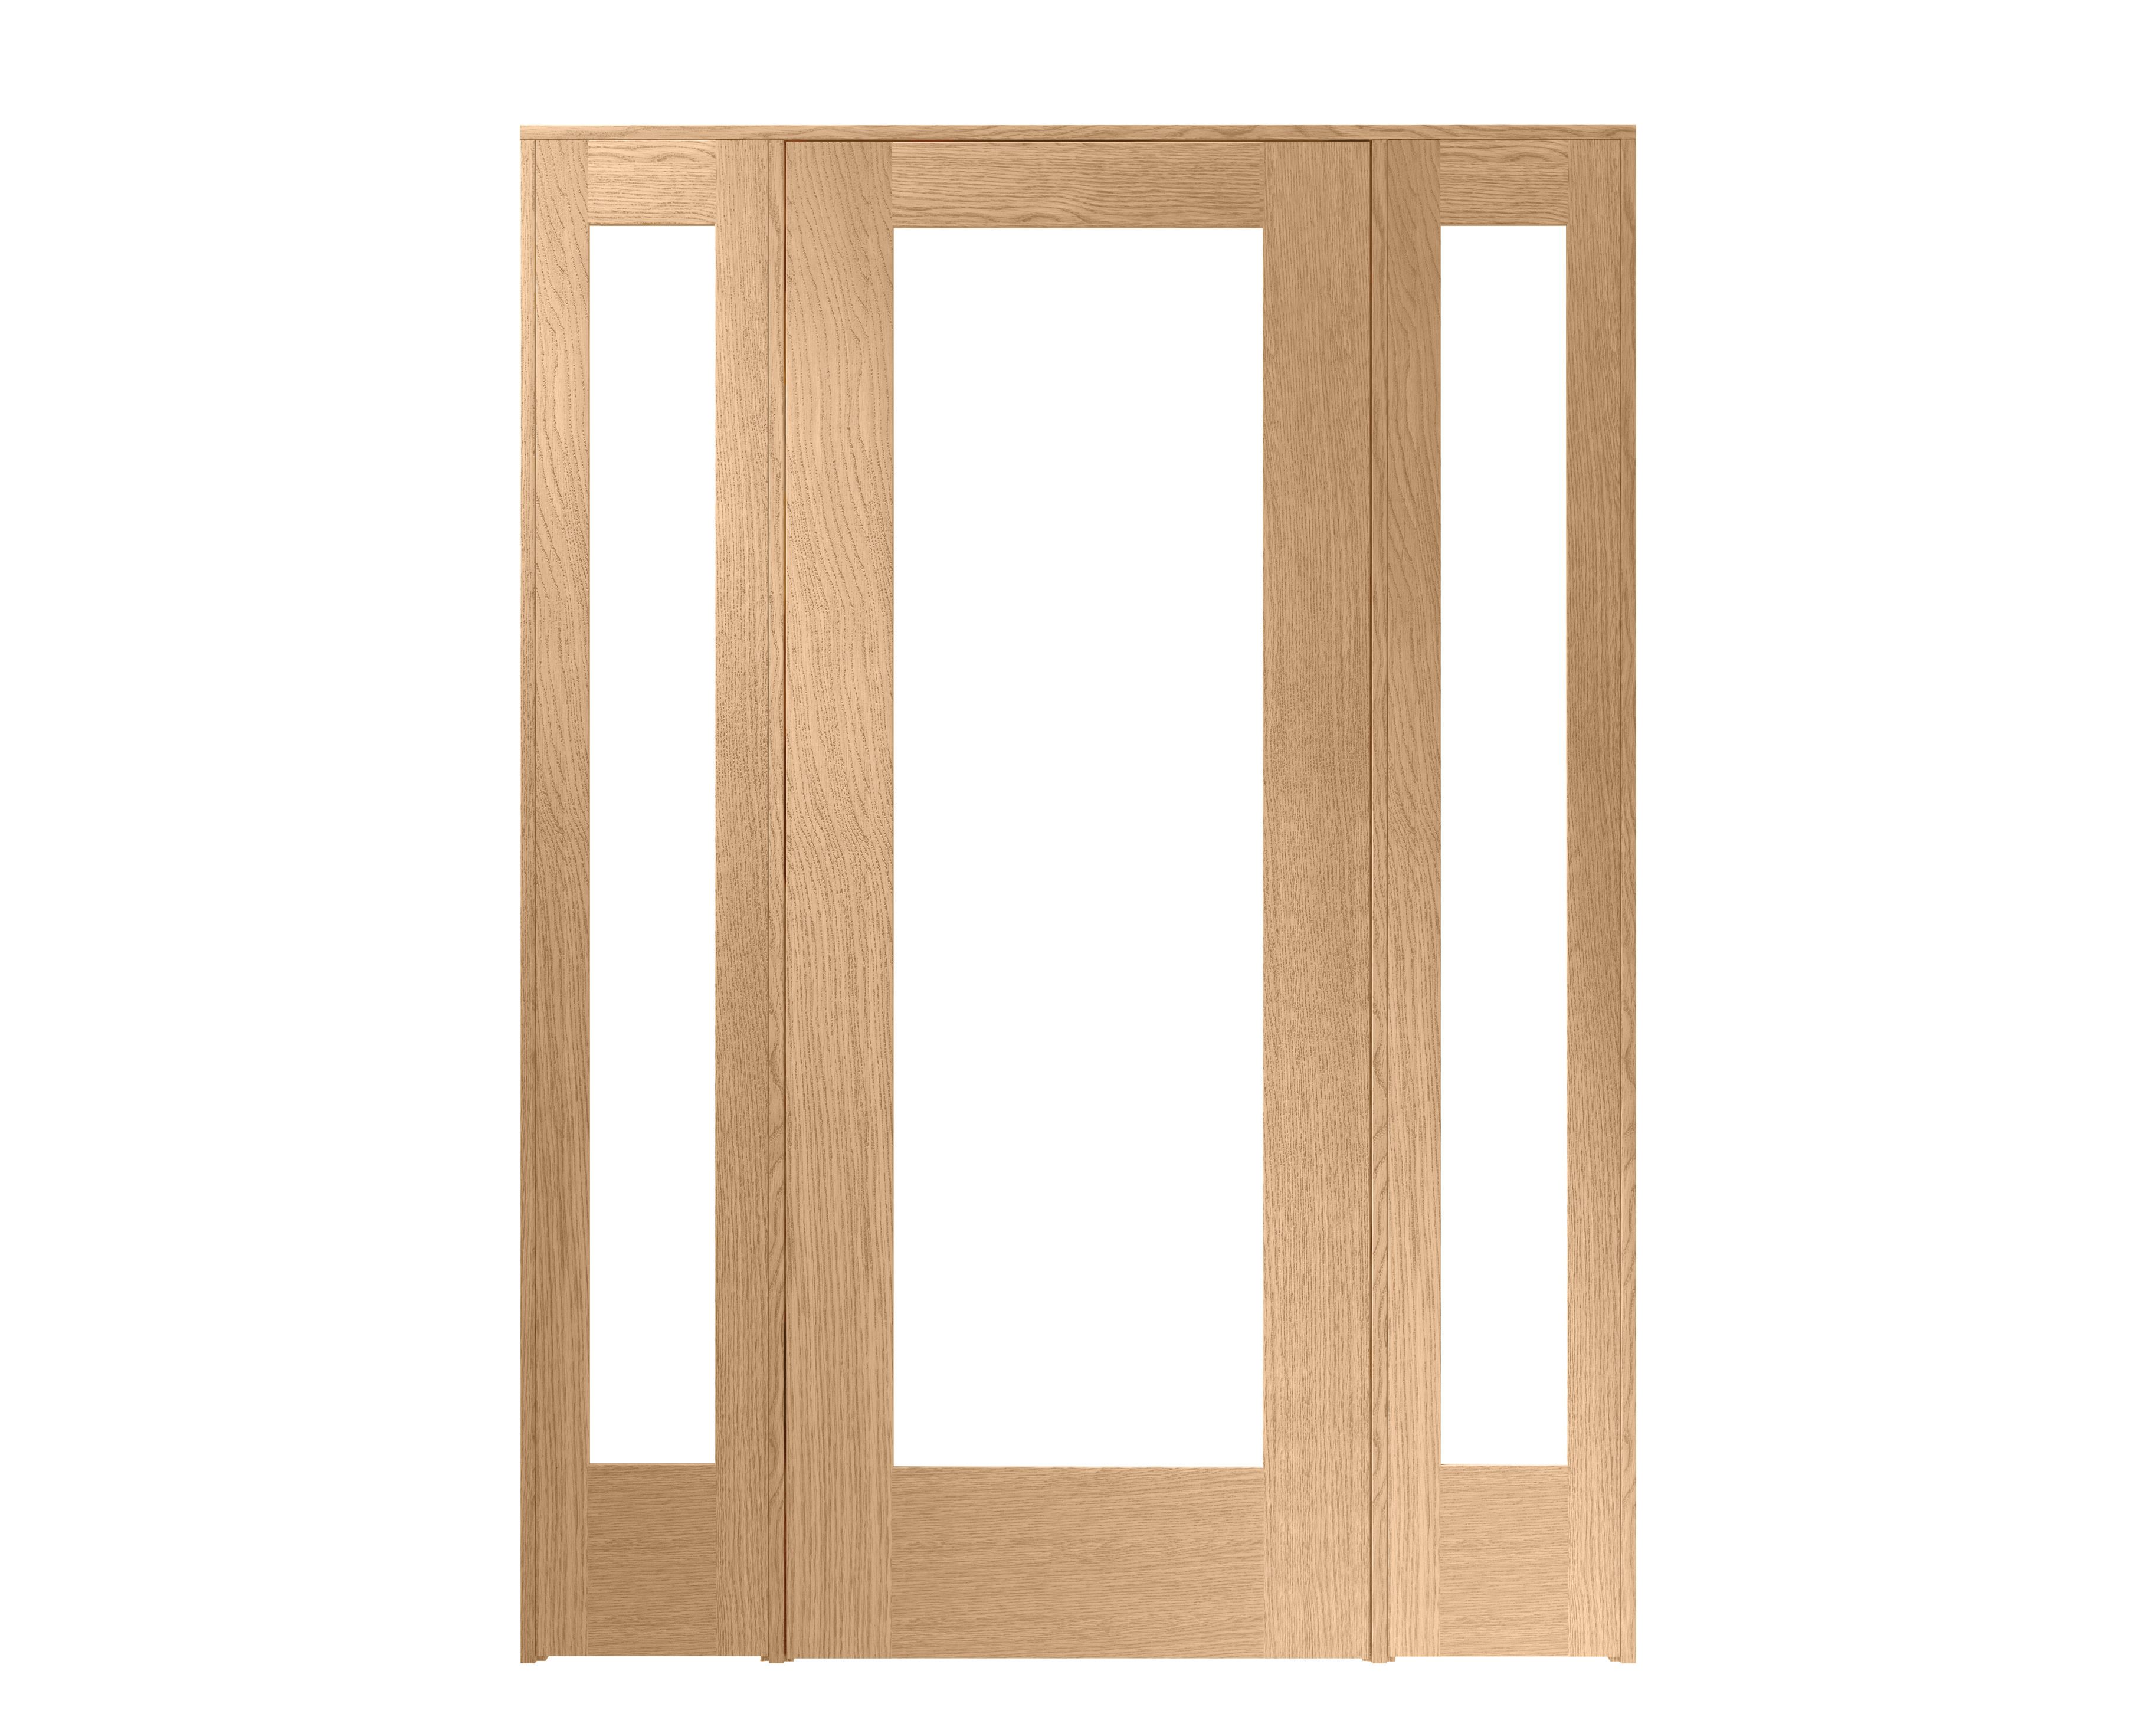 Image of Wickes Oxford Fully Glazed Oak Internal Room Divider Door with 2 Demi Panels - 2017 x 1468mm